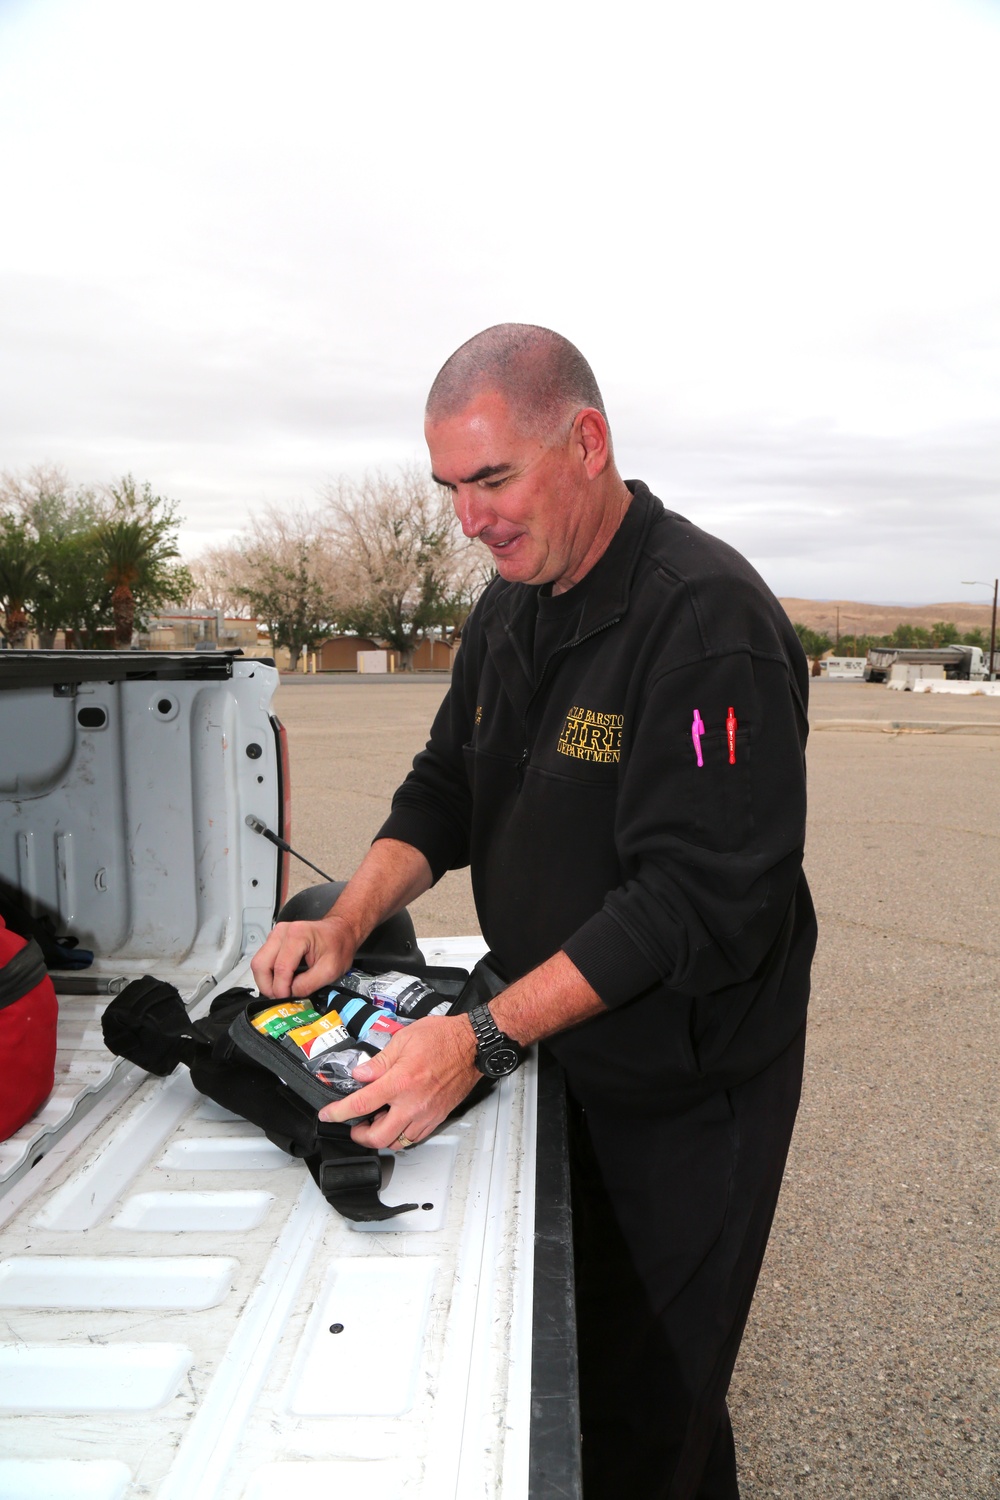 MCLB Barstow's FES receives new rescue system